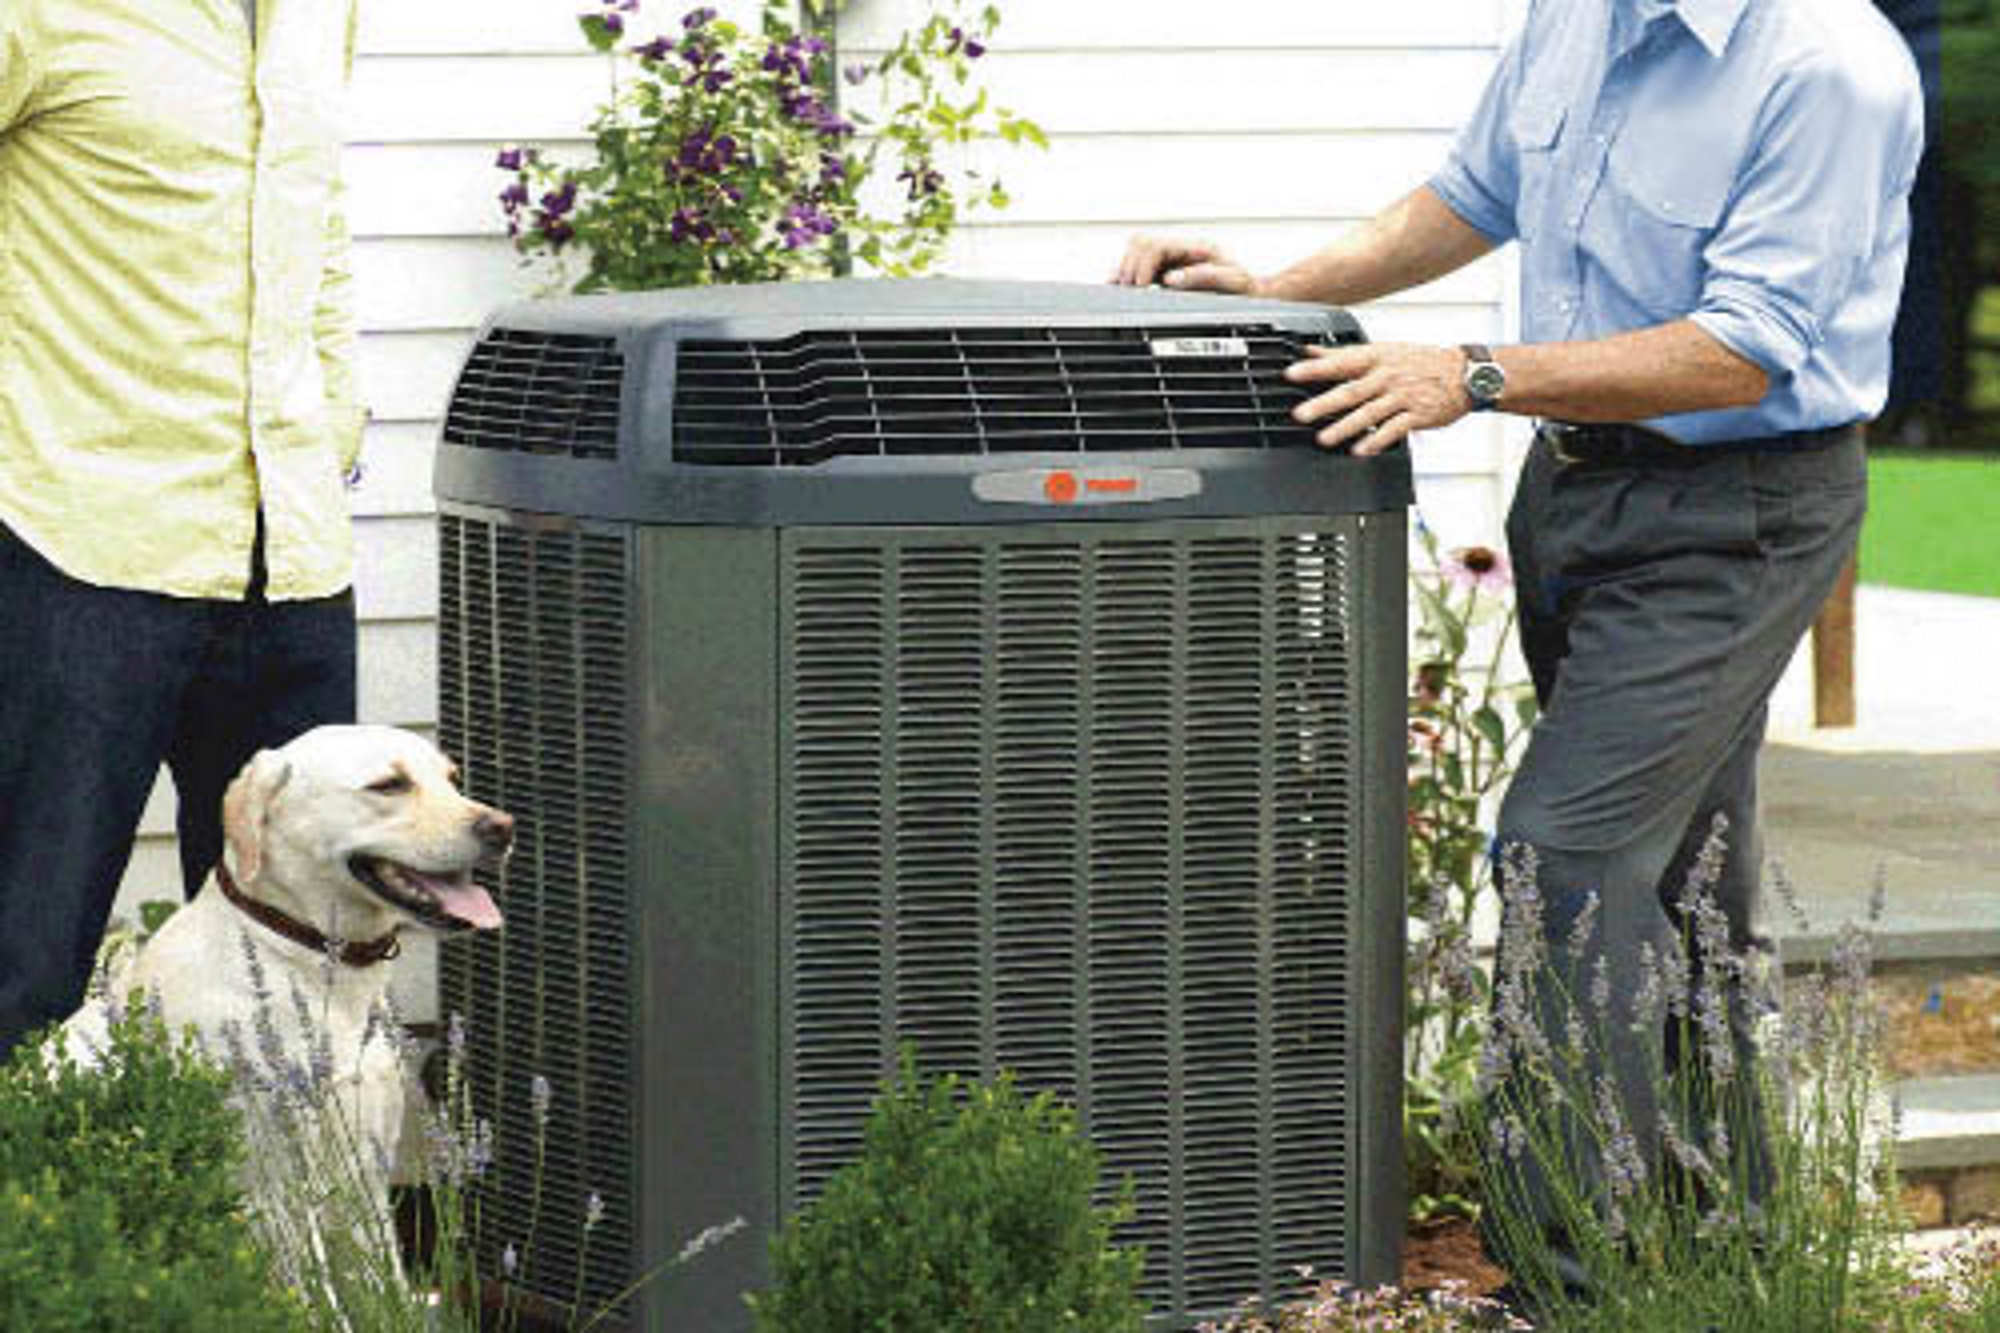 trane-xr14-air-conditioner-specs-and-reviews-efficient-reliable